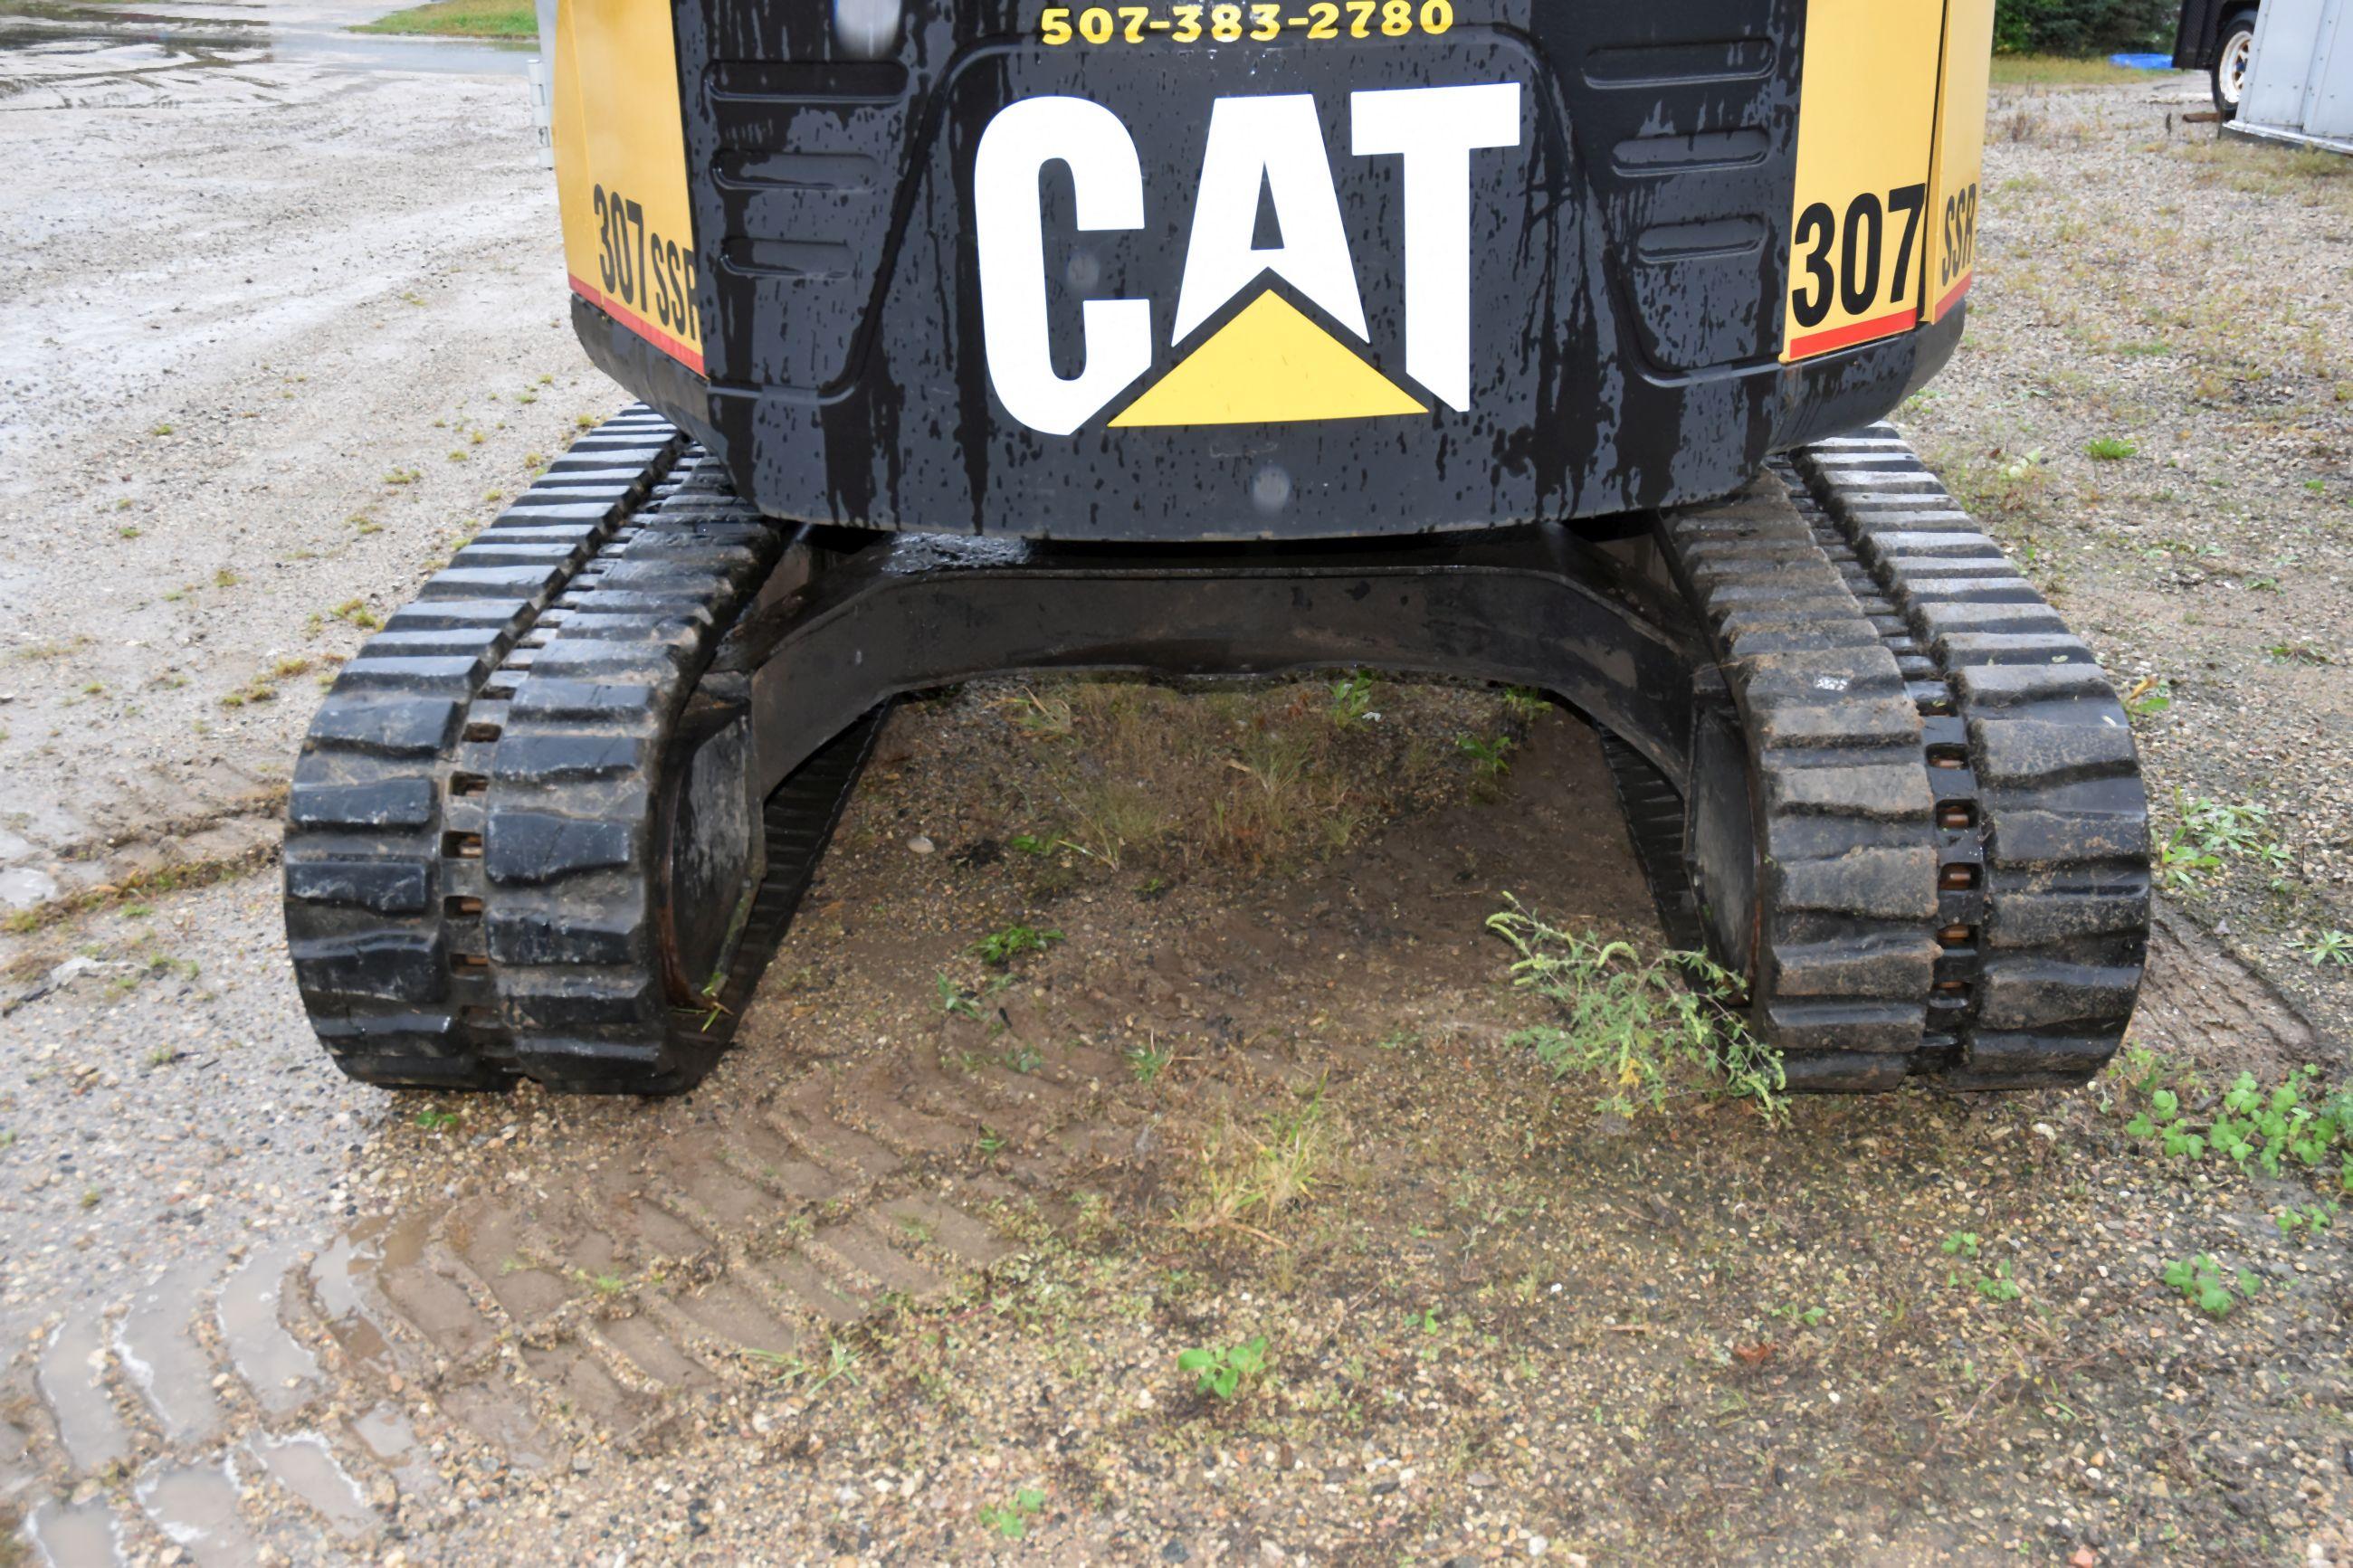 Cat 307SSR Mini Excavator, 7299 Hours Showing, 18” Rubber Tracks,Tracks Ripped, 90” Push Blade, 22''